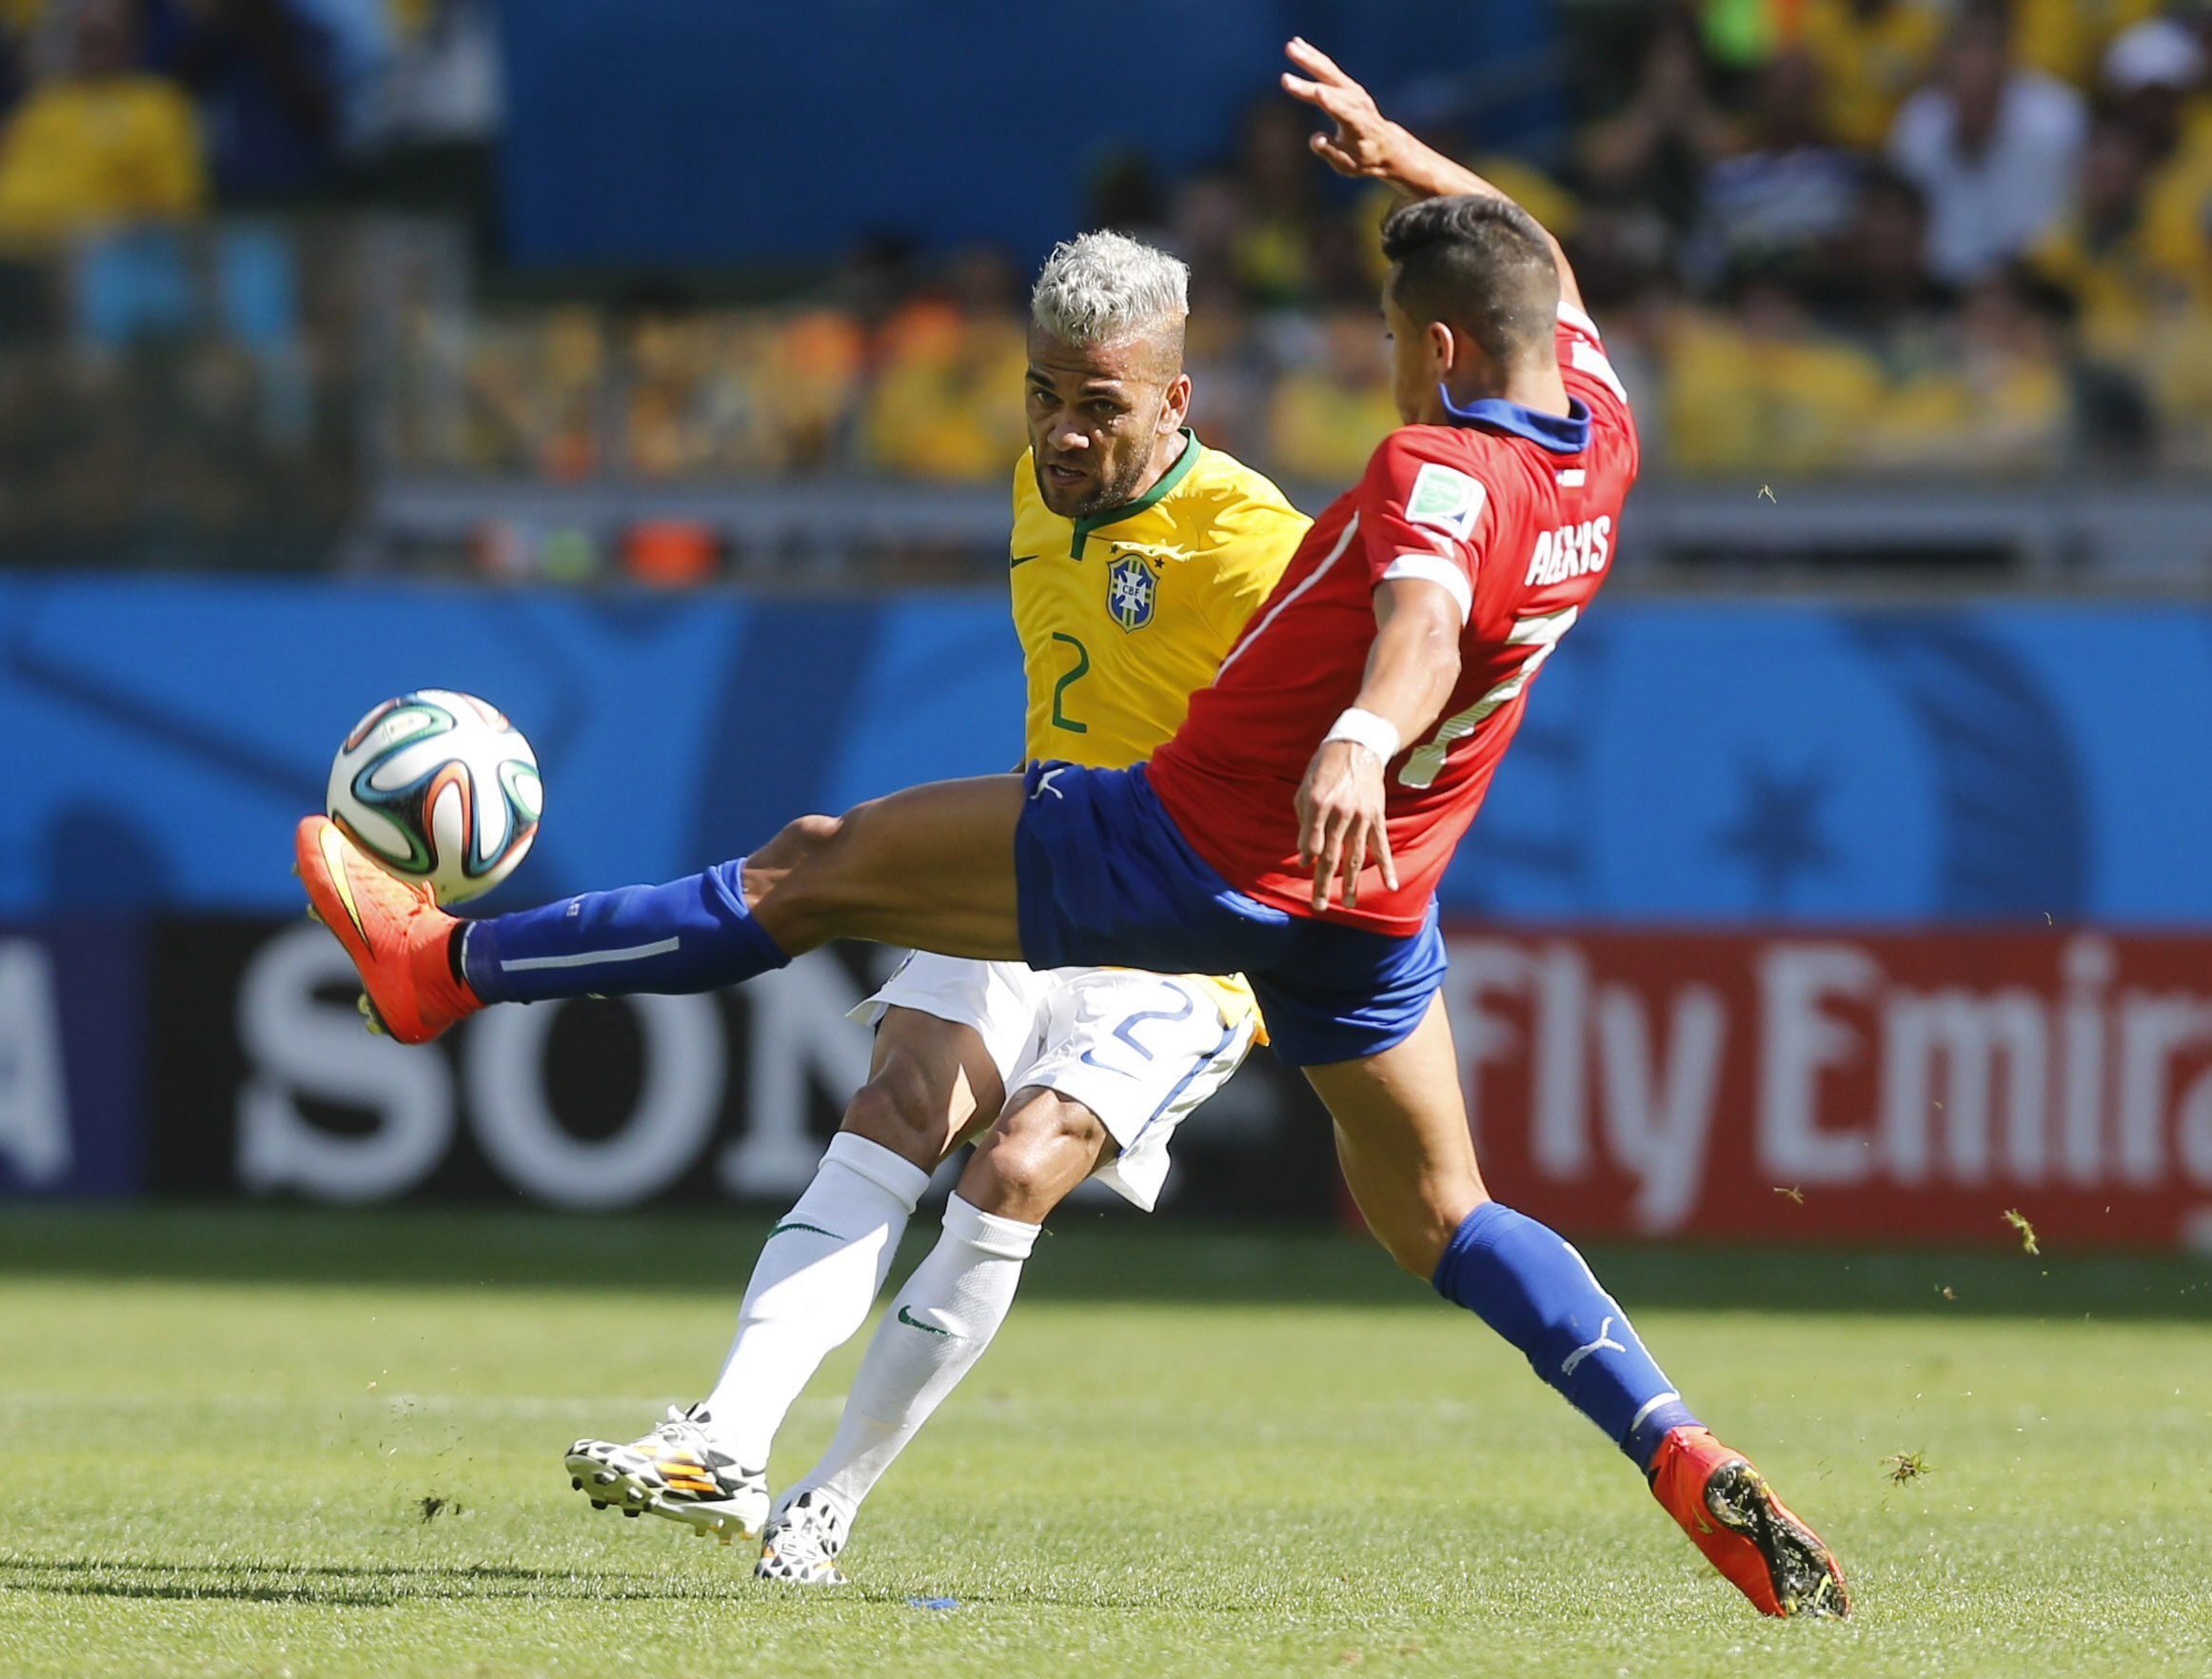 Dani Alves of Brazil vies with Alexis Sanchez of Chile during the match between Brazil and Chile at the Estadio Mineirao in Belo Horizonte, Brazil on June 28, 2014.